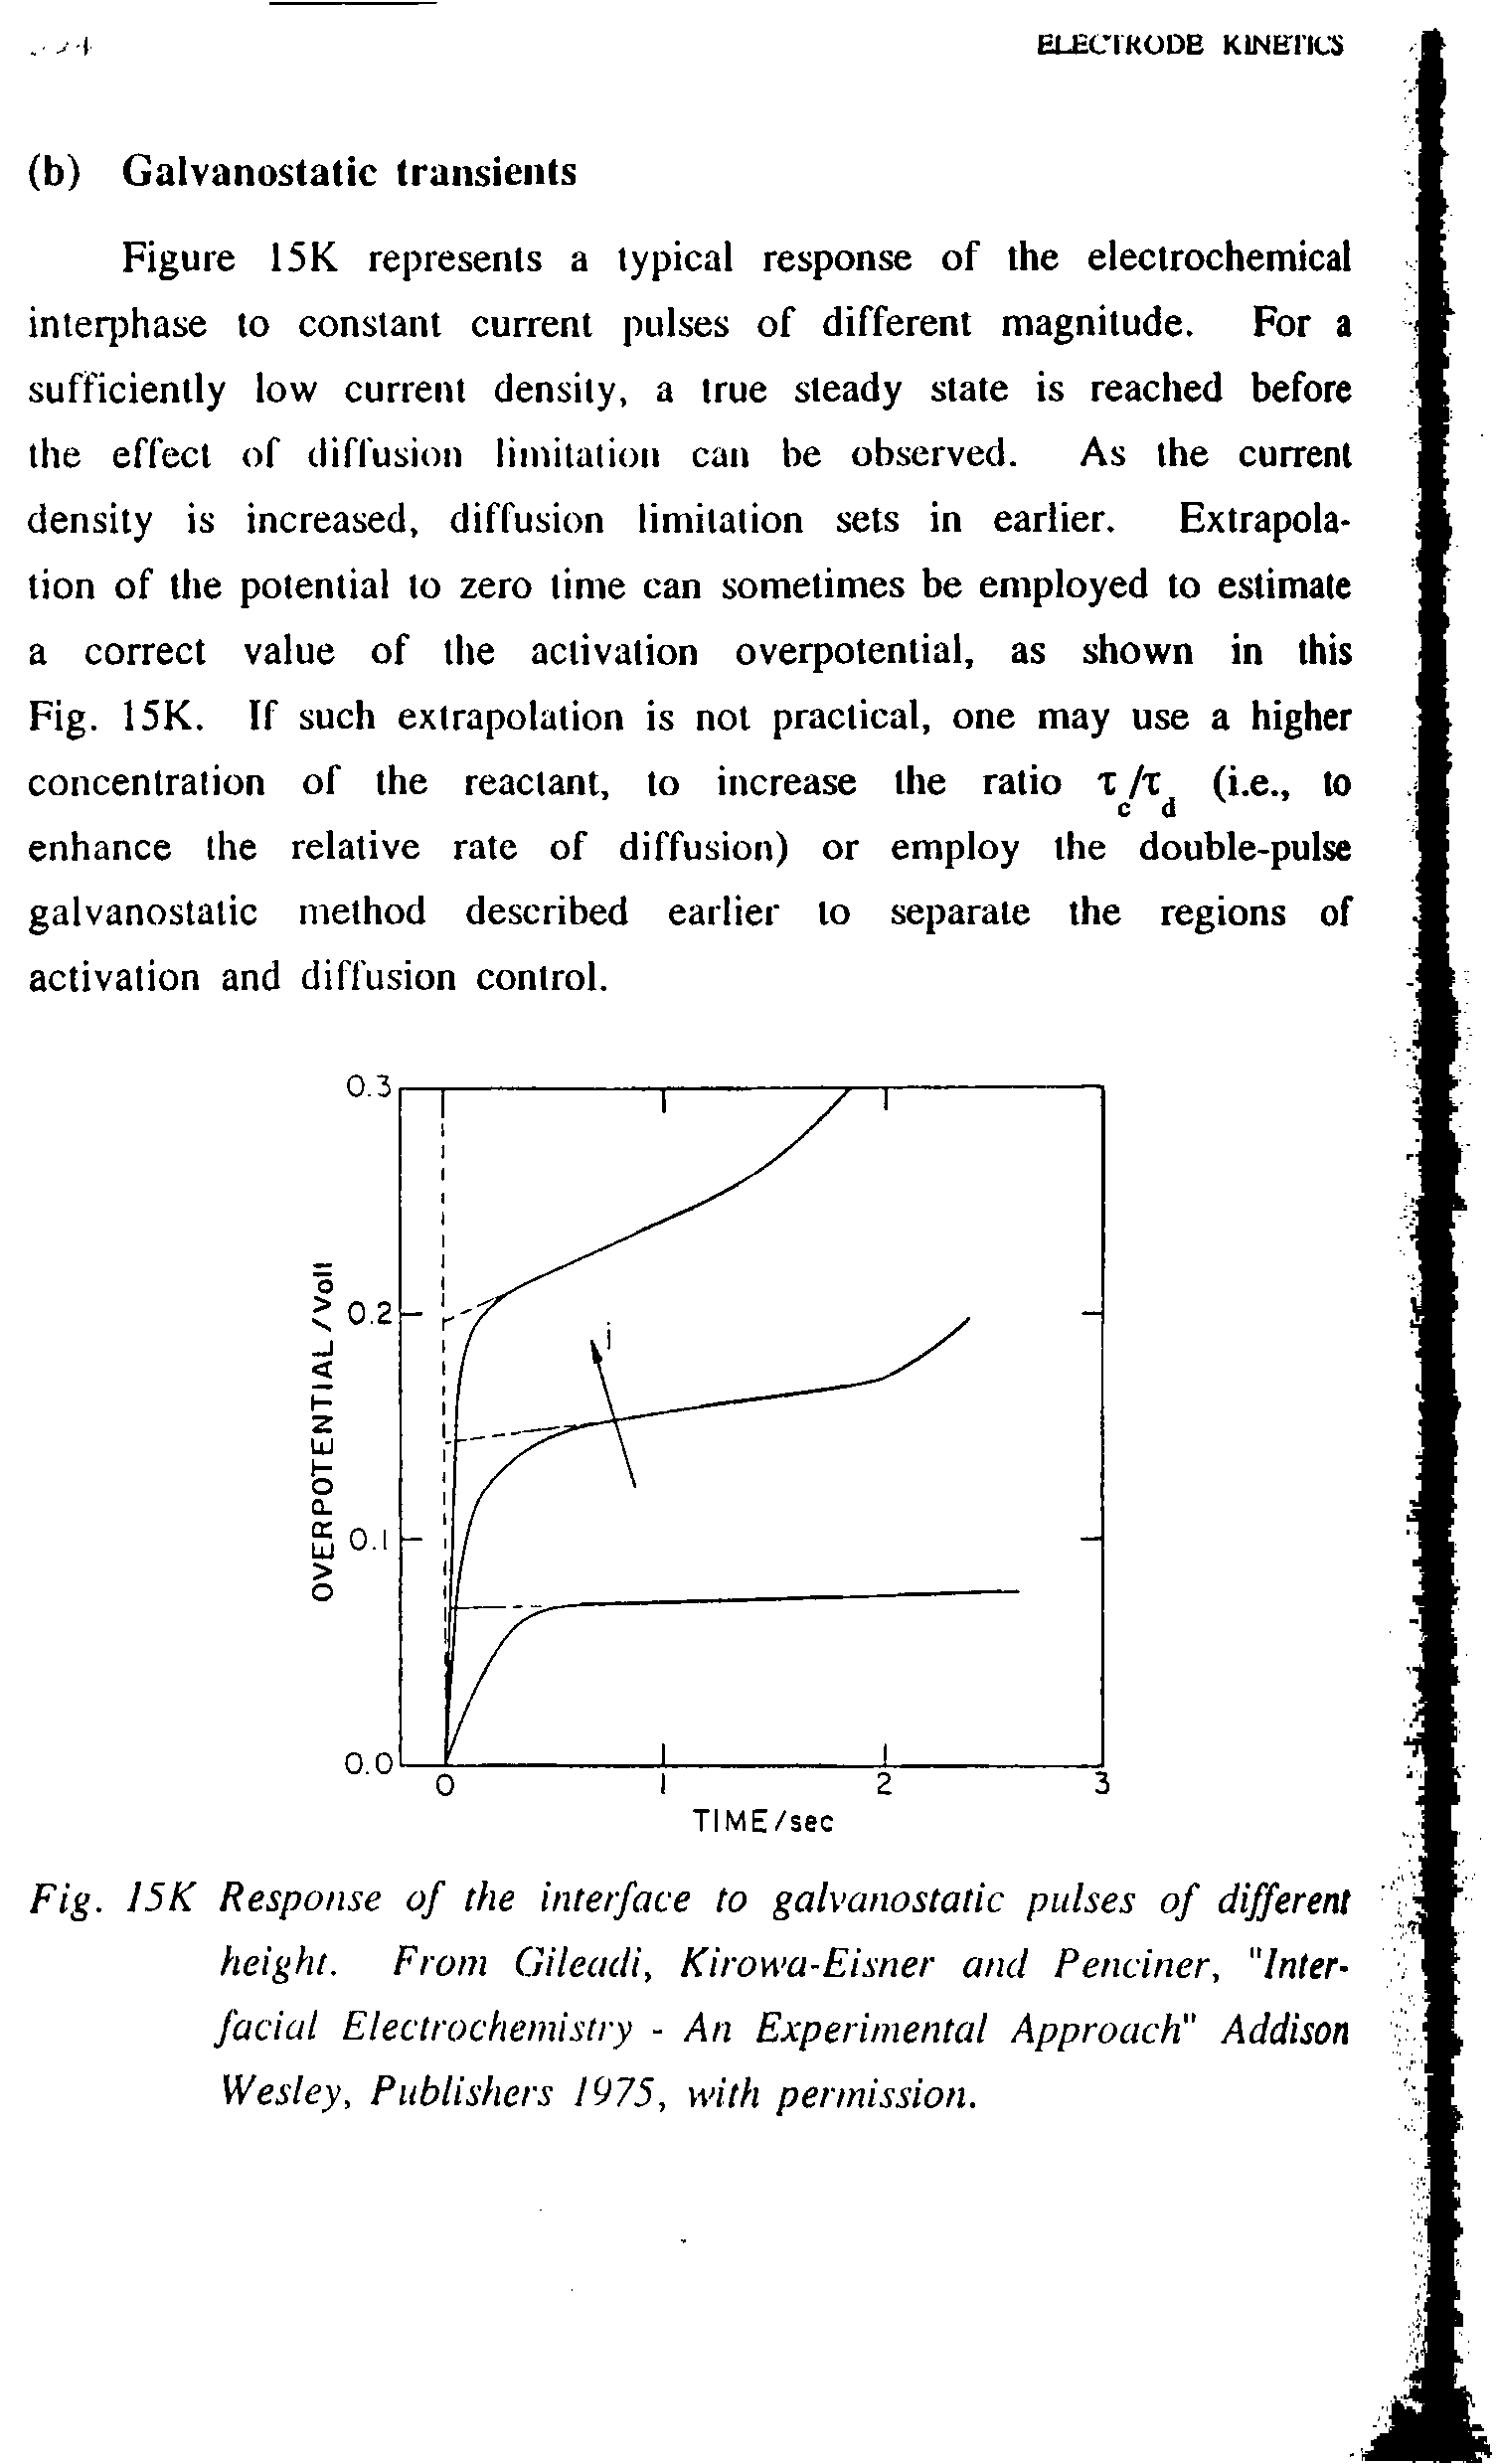 Figure 15K represents a typical response of the electrochemical inteqjhase to constant current pulses of different magnitude. For a sufficiently low current density, a true steady state is reached before the effect of diffusion limitation can be observed. As the current density is increased, diffusion limitation sets in earlier. Extrapolation of the potential to zero time can sometimes be employed to estimate a correct value of the activation overpotential, as shown in this Fig. 15K. If such extrapolation is not practical, one may use a higher concentration of the reactant, to increase the ratio x /x (i.e., to...